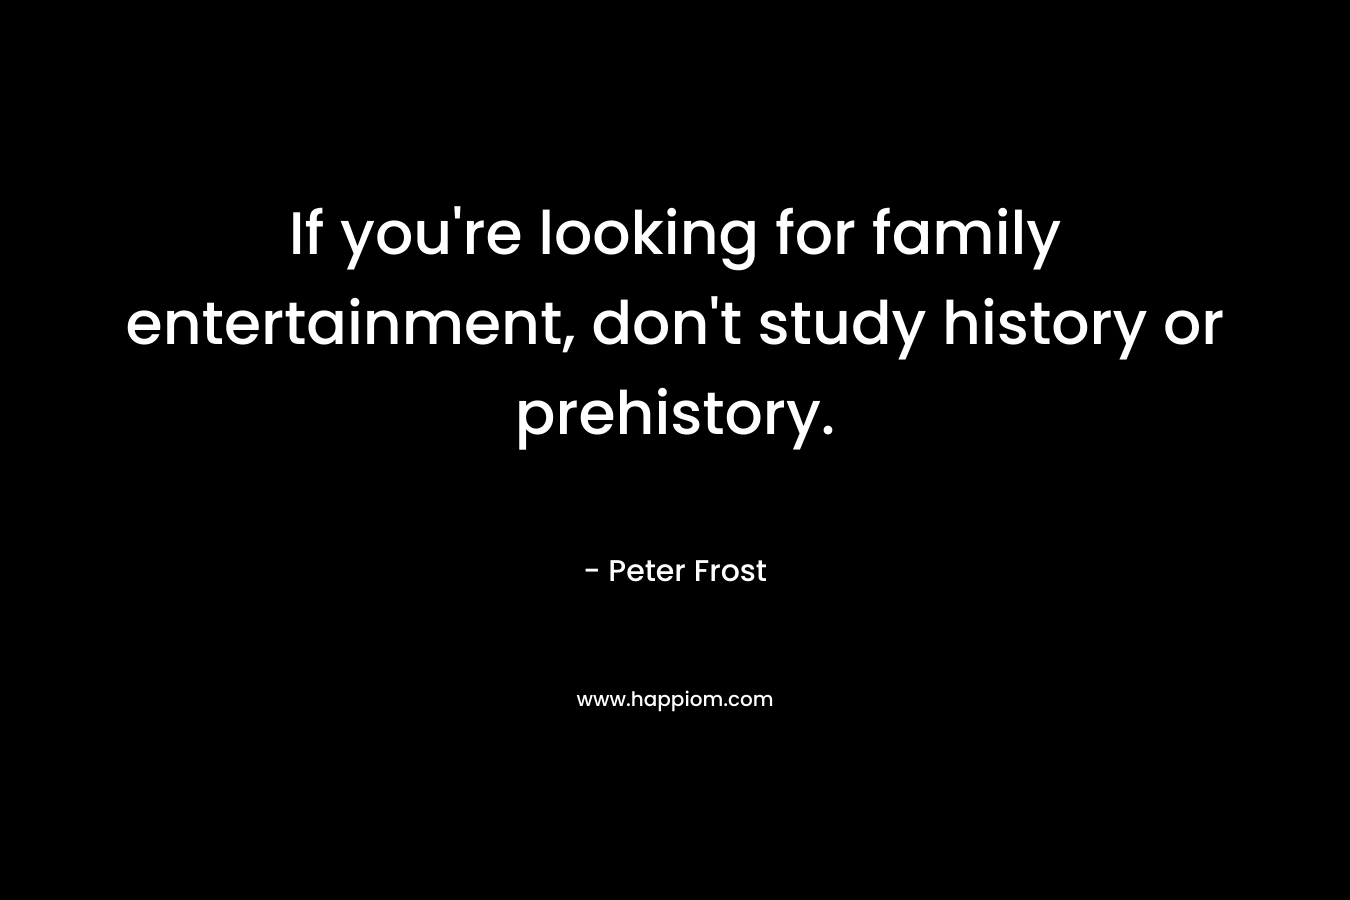 If you’re looking for family entertainment, don’t study history or prehistory. – Peter Frost